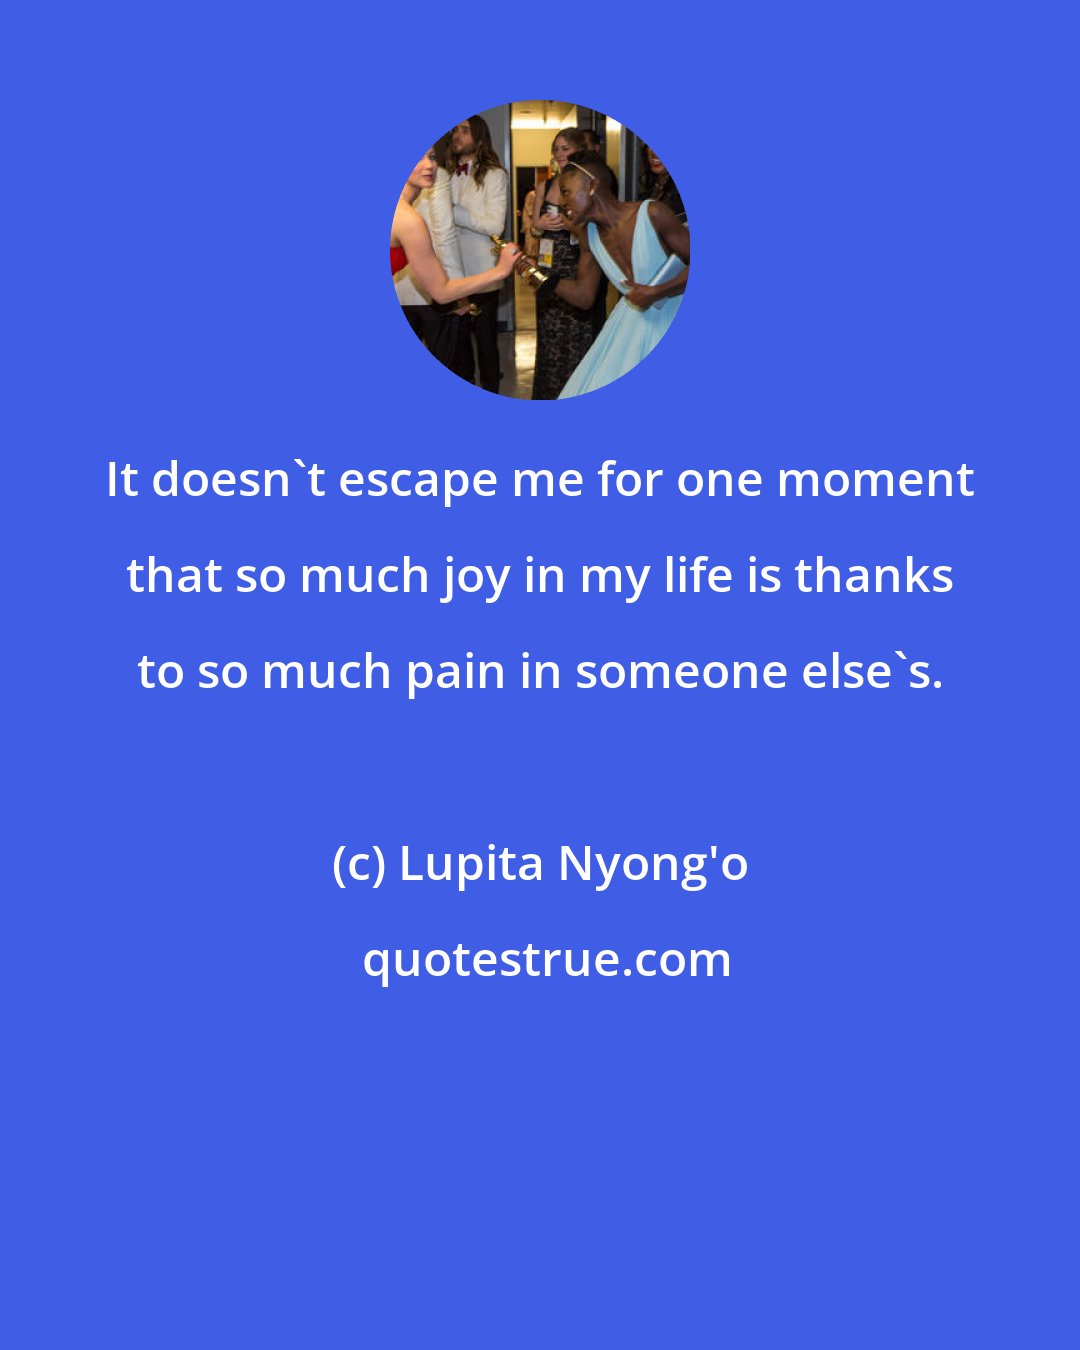 Lupita Nyong'o: It doesn't escape me for one moment that so much joy in my life is thanks to so much pain in someone else's.